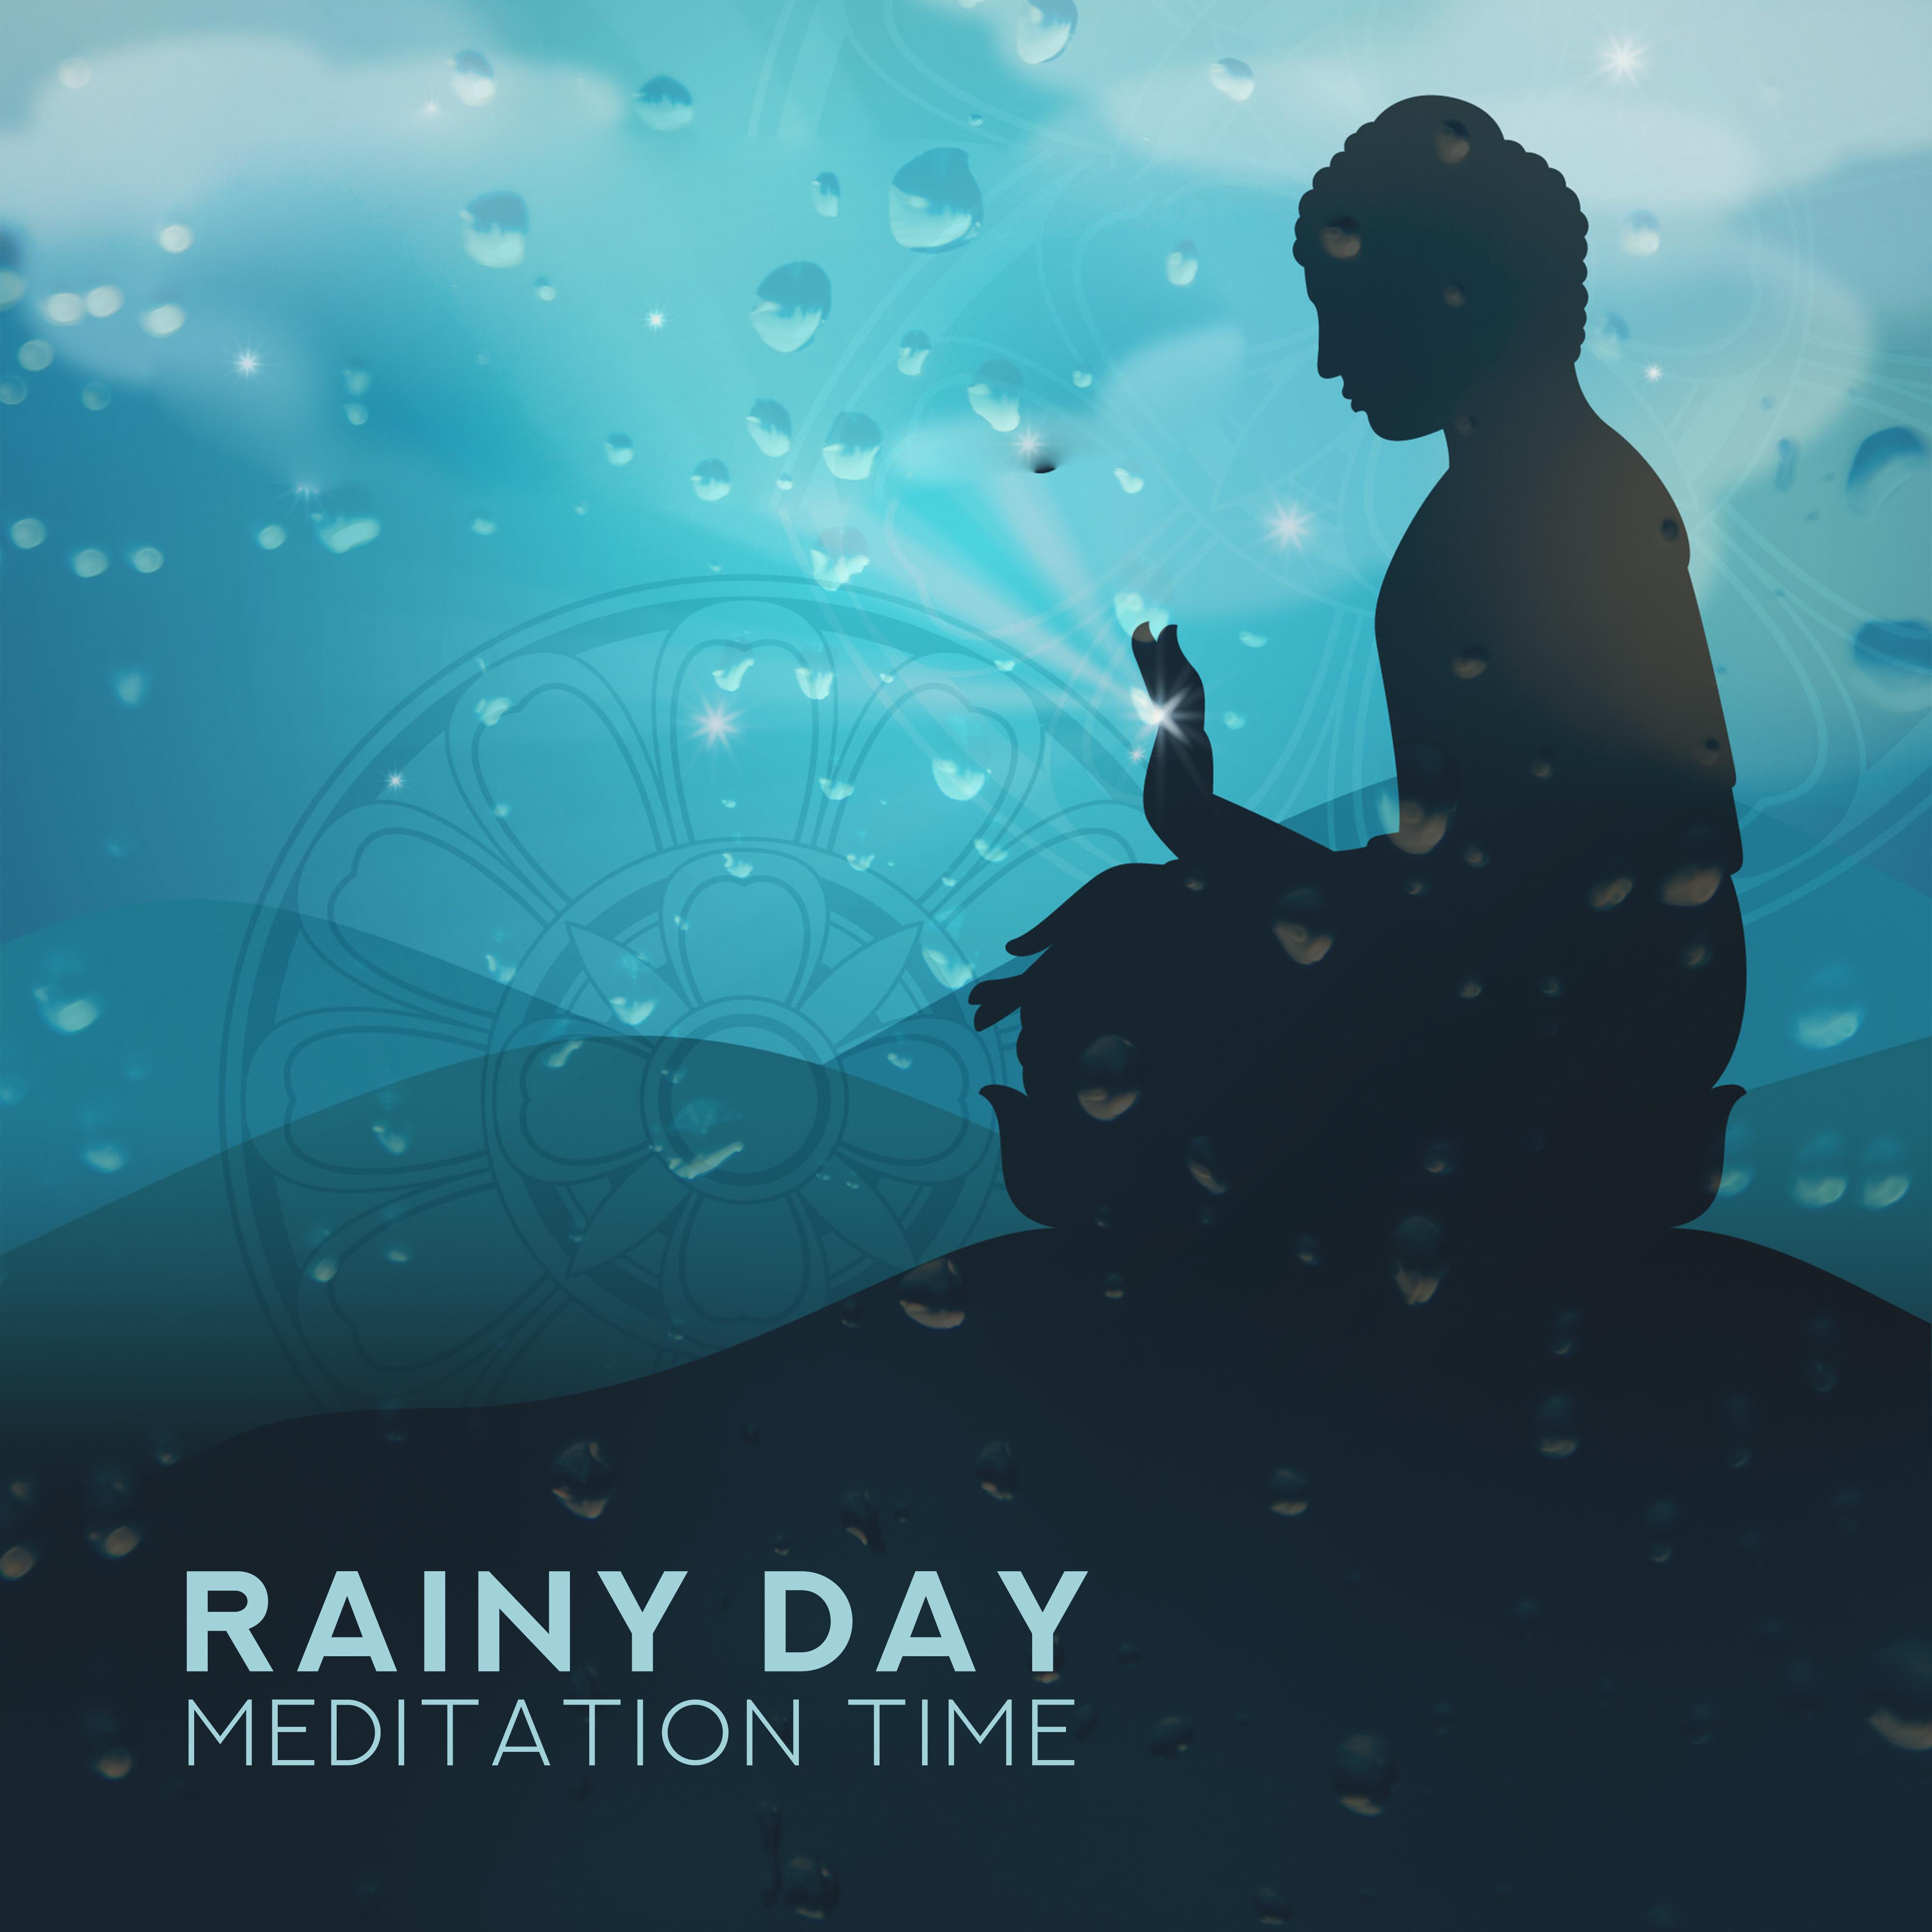 Rainy Day Meditation Time: 15 New Age Songs for Best Yoga & Relaxation Experience, Nature & Ambient Music, Chakra Balancing, Body & Mind Healing, Mantra Zen Garden